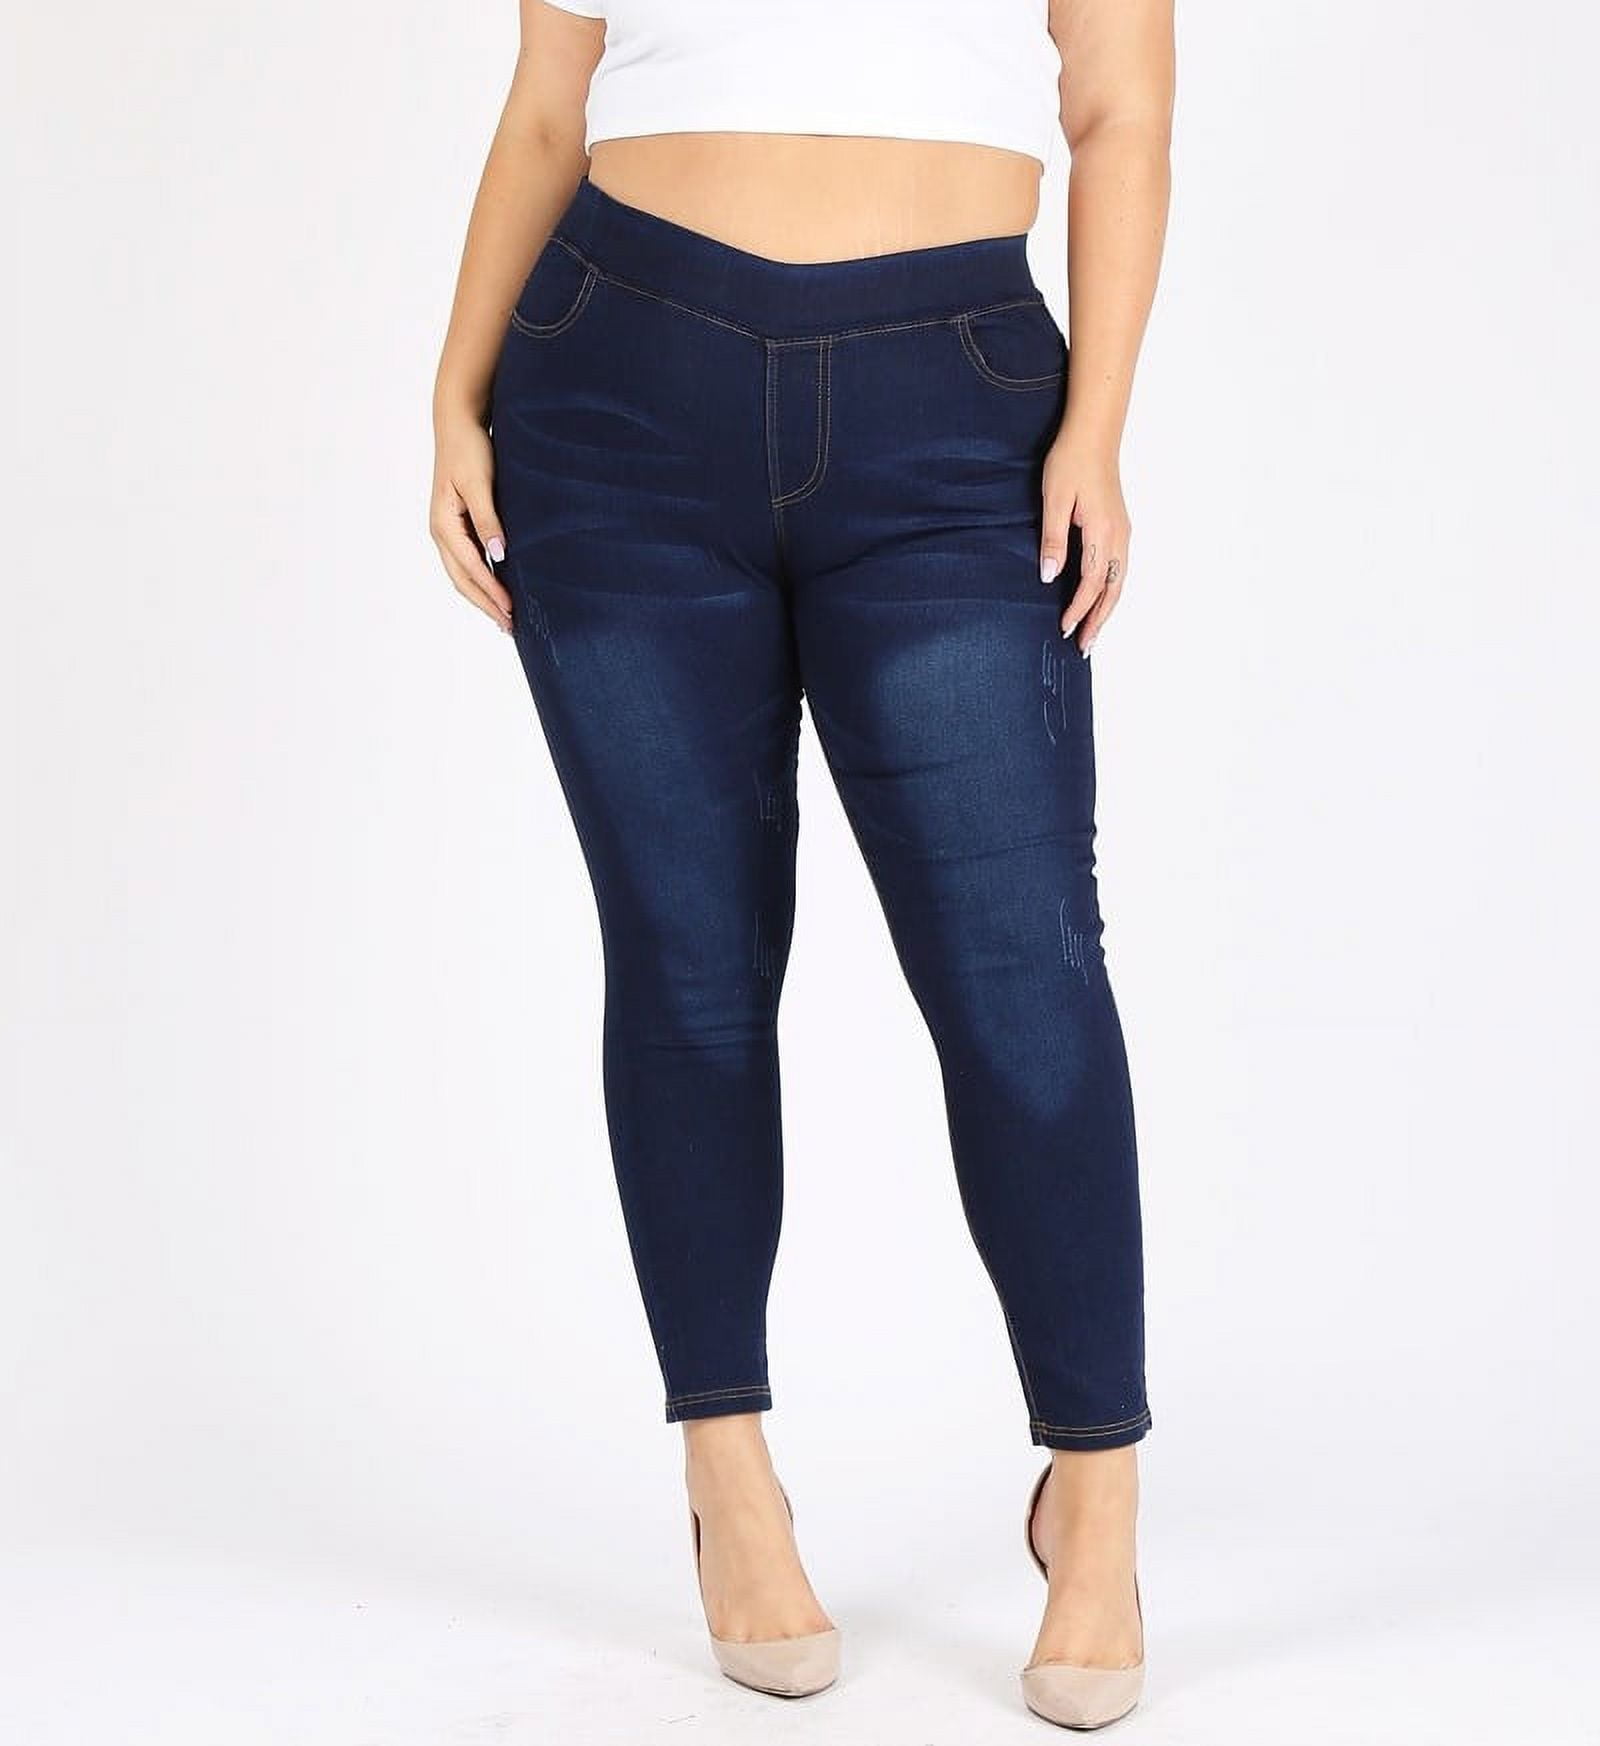 Women's plus size jeggings pull-on stretch fashion jeans with a  waist-hugging feeling in mid-rise design